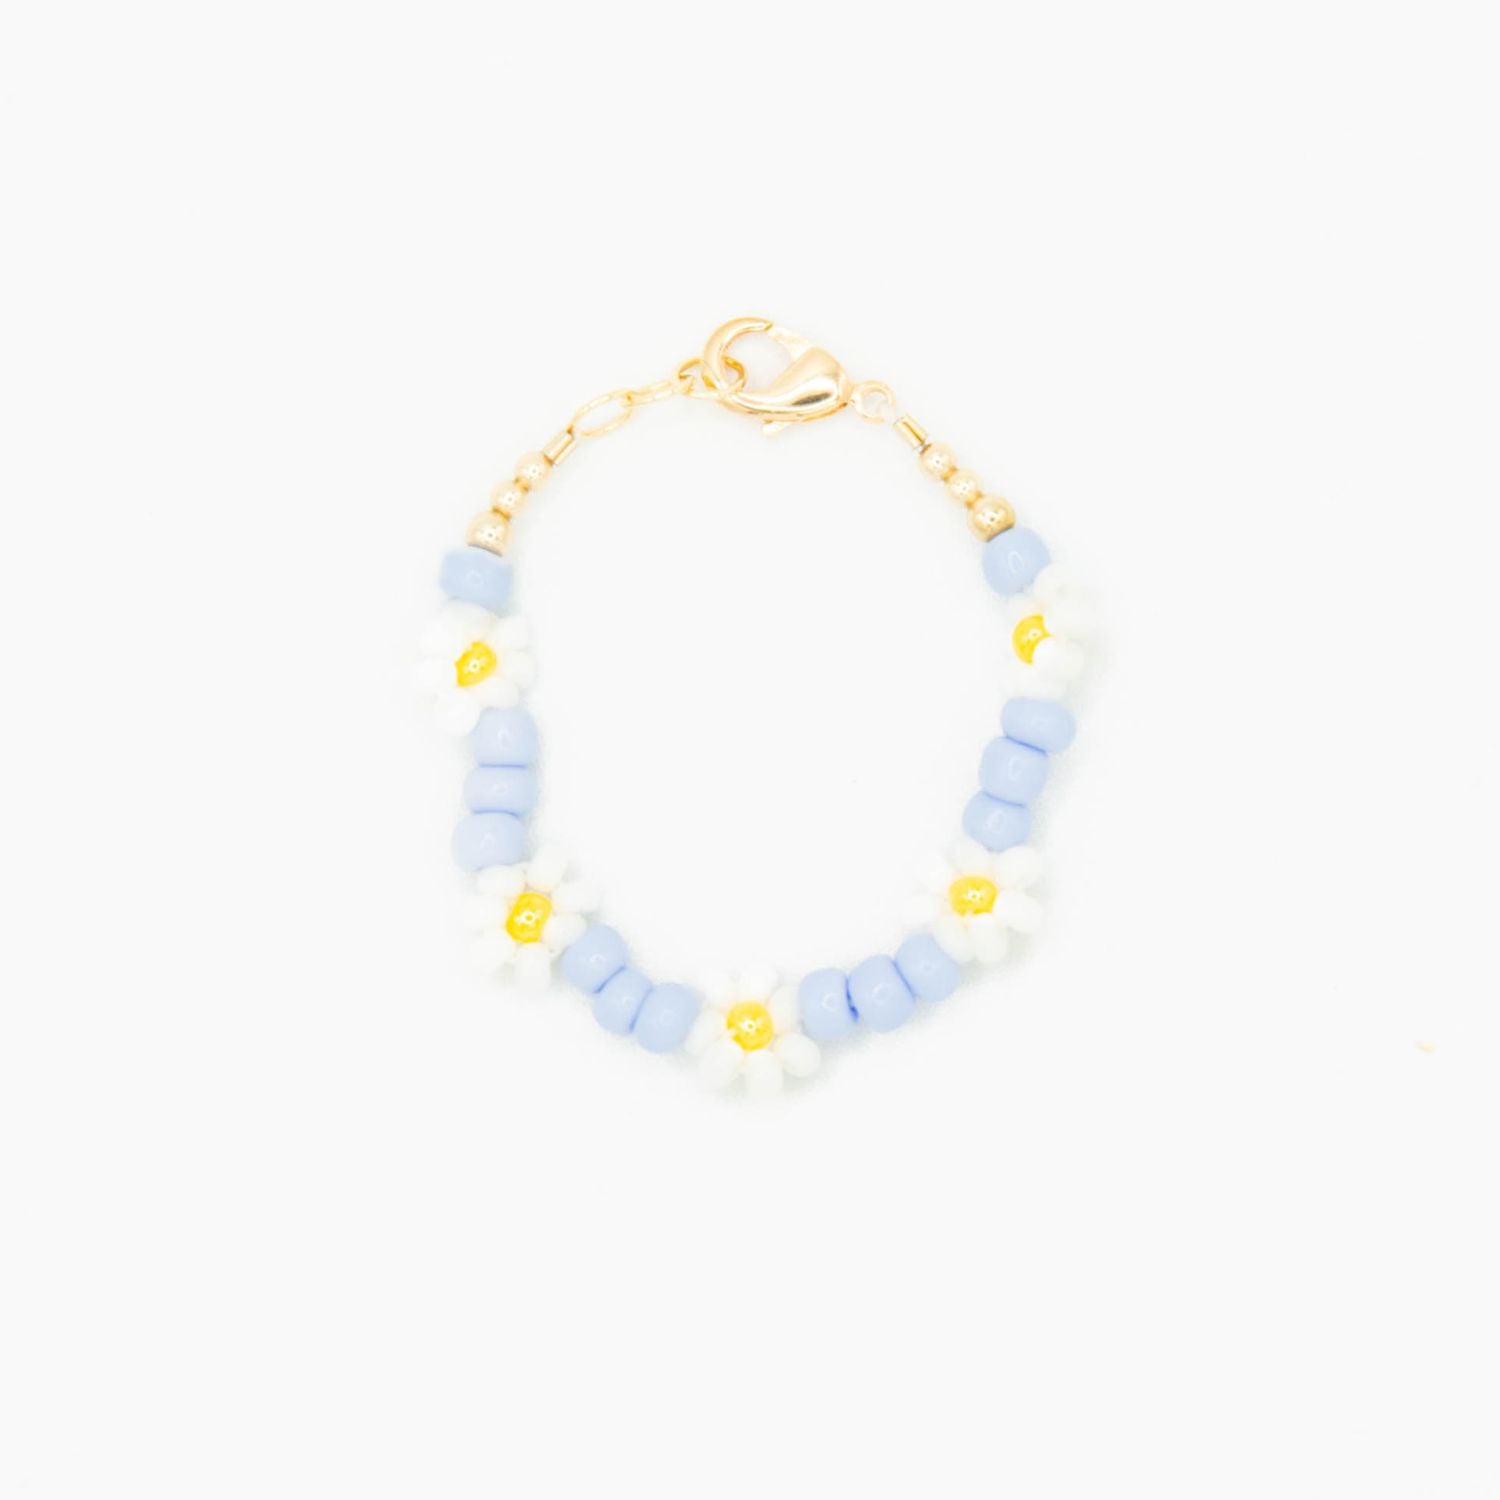 Quill and Goose 14K Gold Filled Floral Bracelet - White and Blue